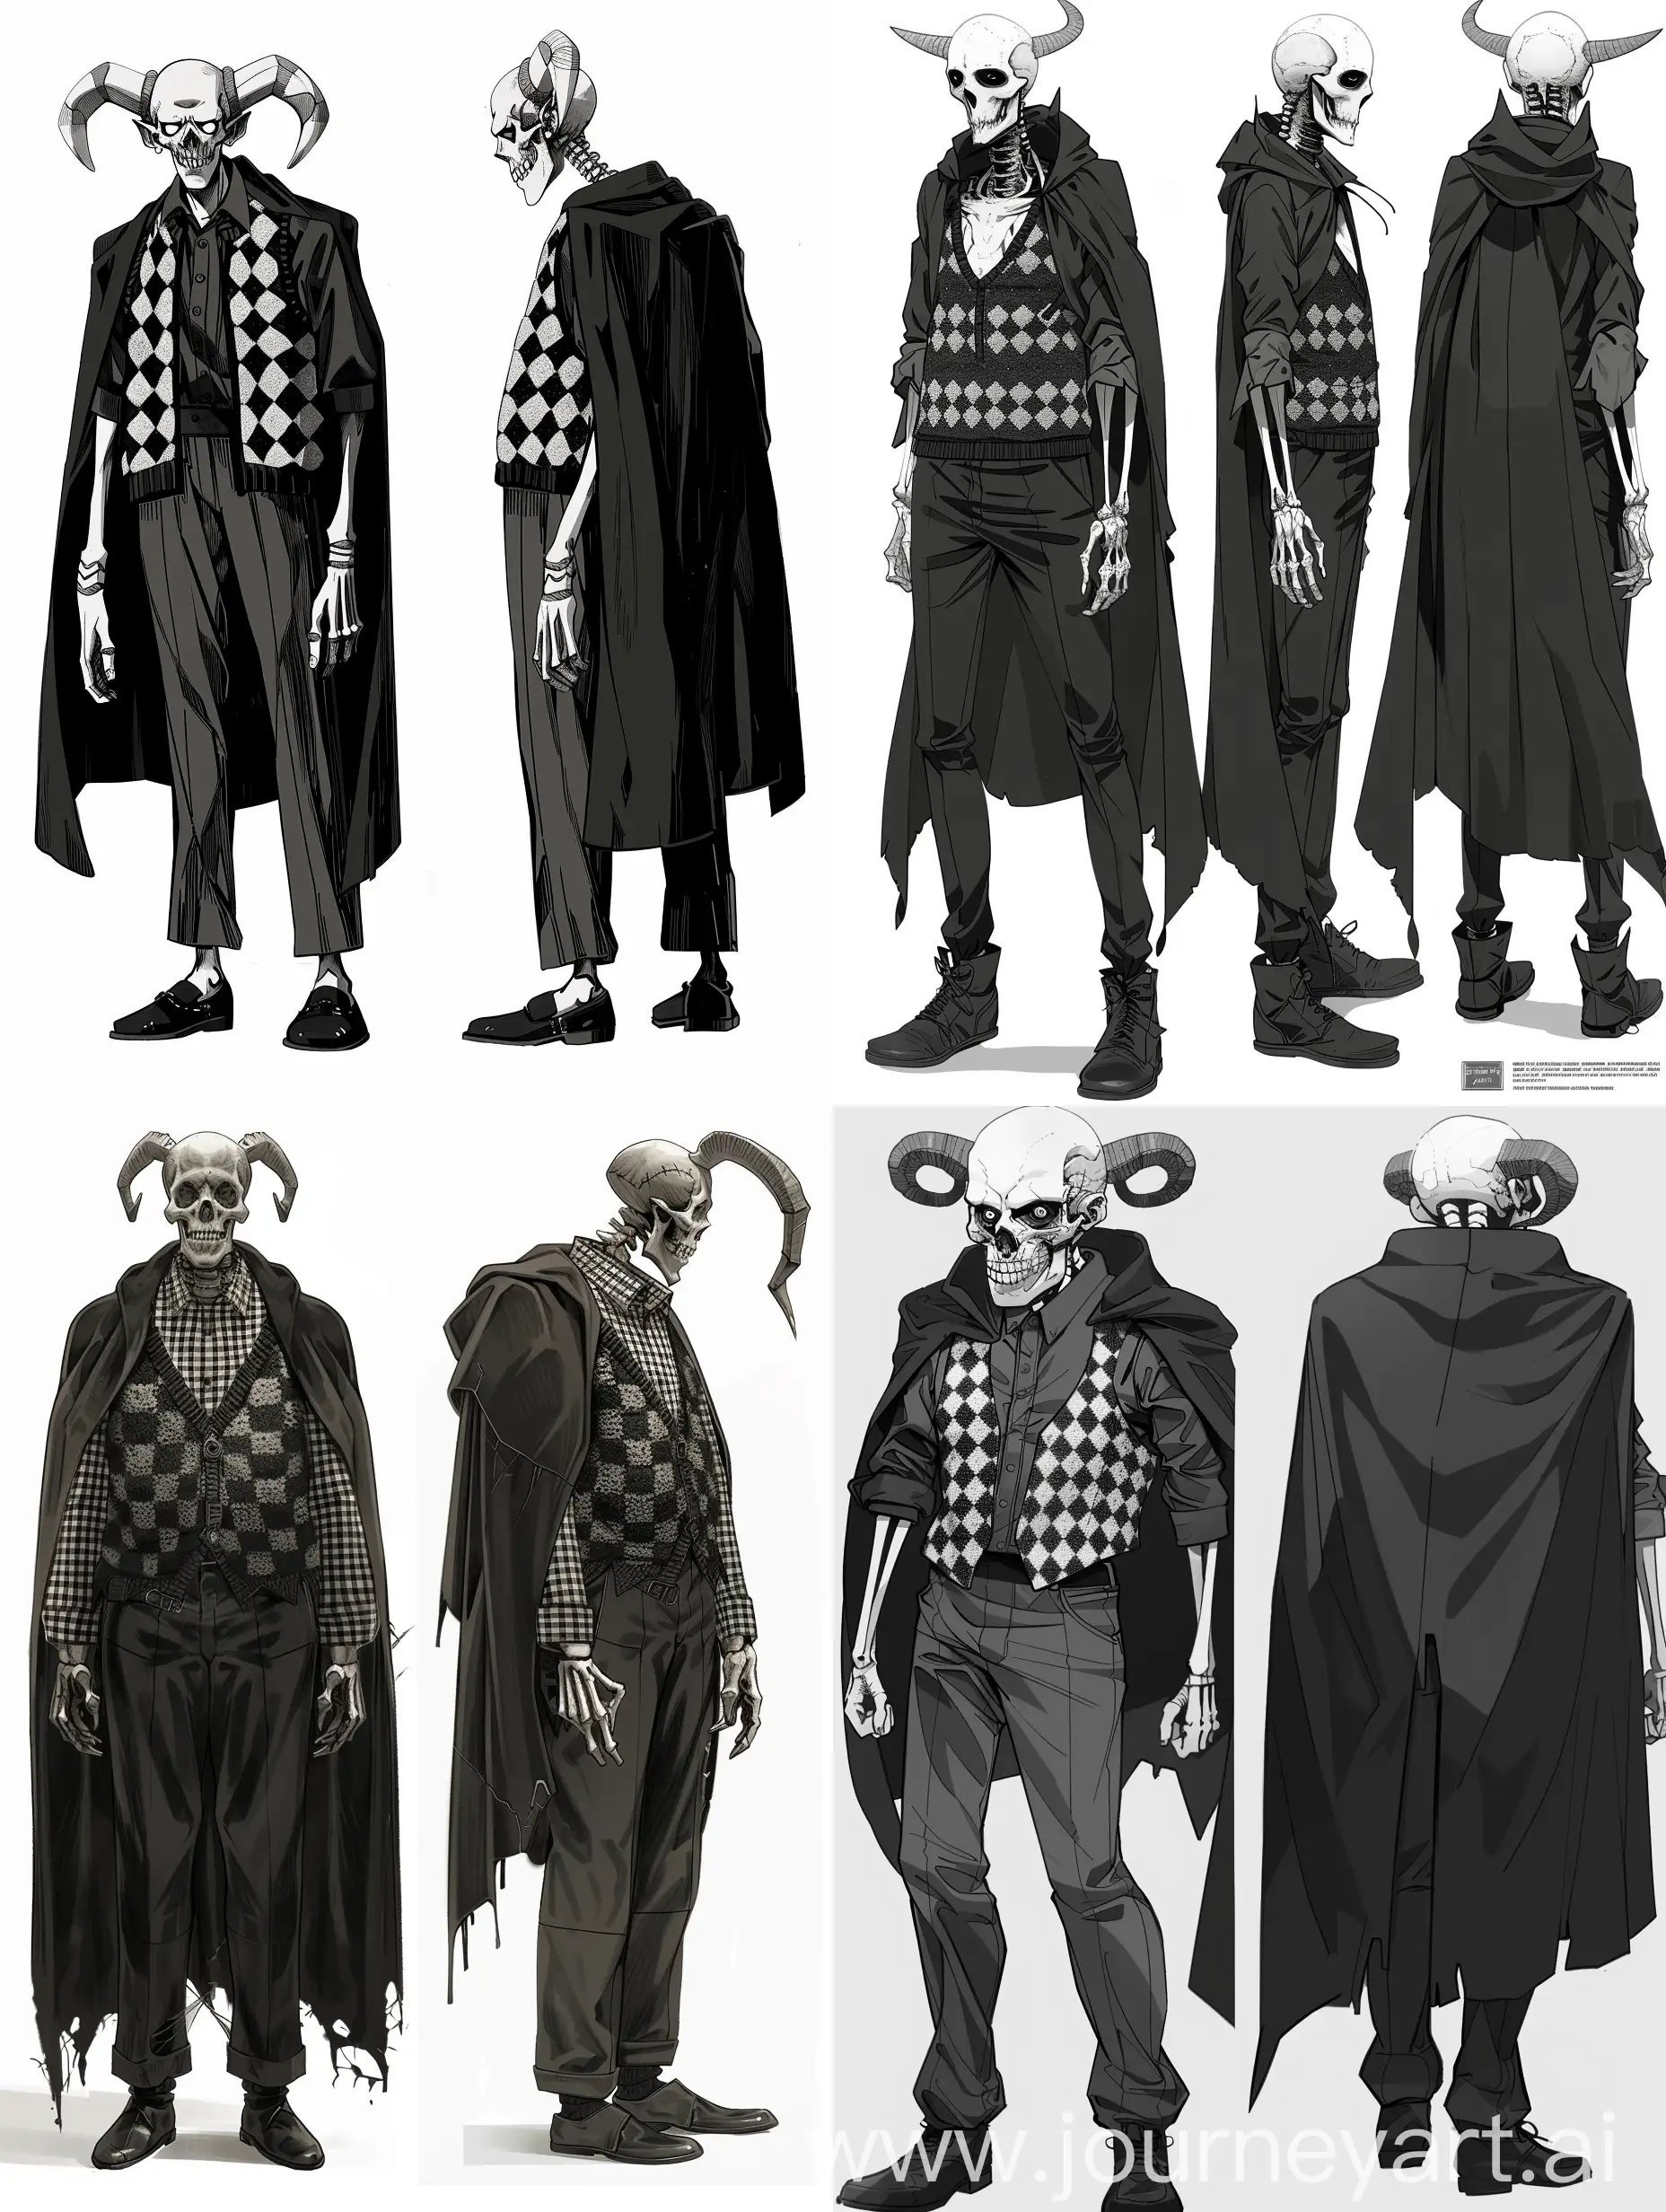 guy, tall, anime, broad shoulders, face with a skull, rounded horns, dark cloak, shirt with a knitted vest in a checkered pattern, trousers, shoes, full growth, multiple views